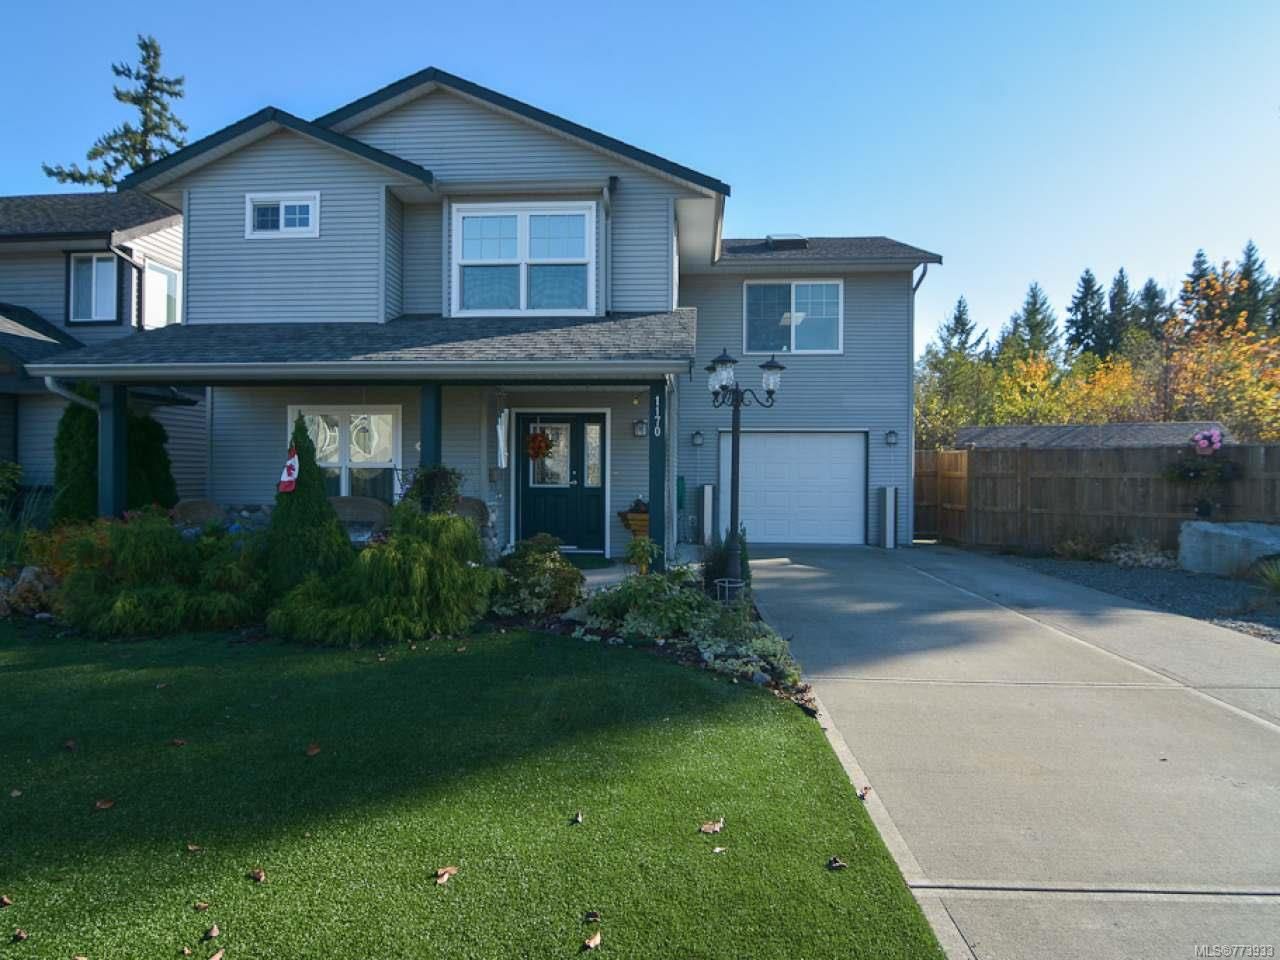 Main Photo: 1170 HORNBY PLACE in COURTENAY: CV Courtenay City House for sale (Comox Valley)  : MLS®# 773933